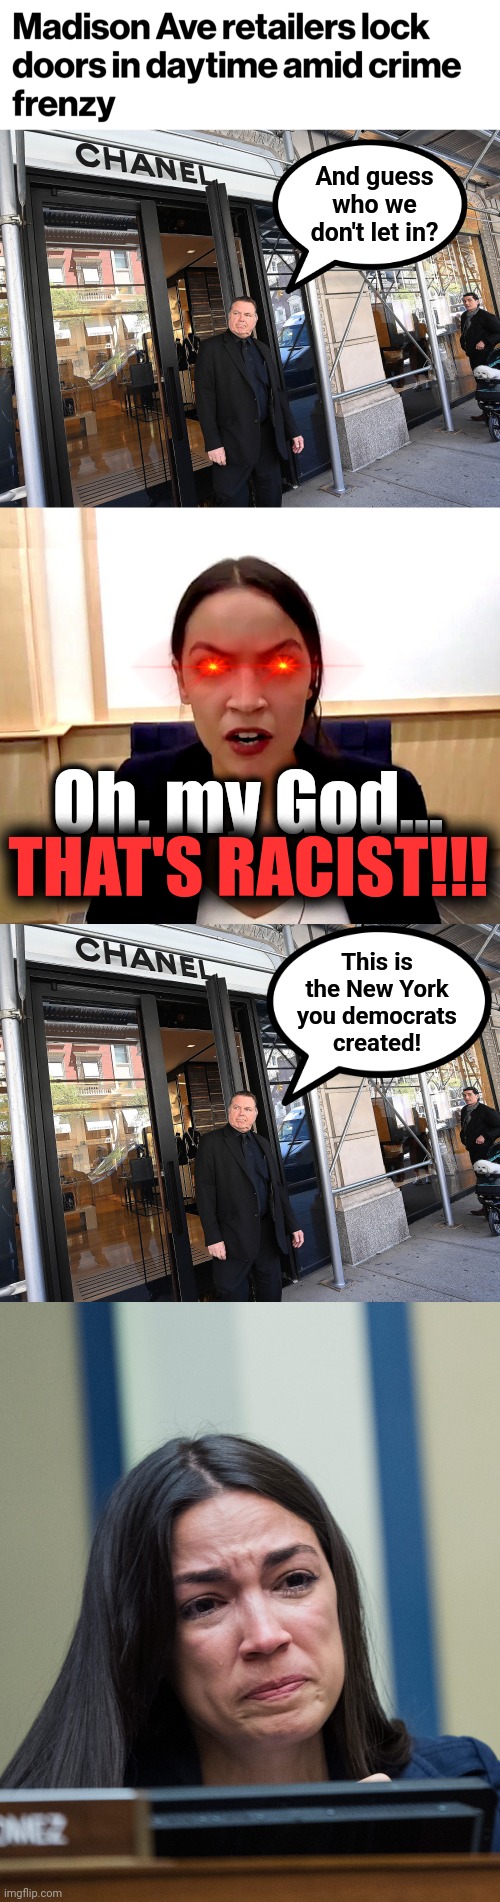 The New York democrats have created | And guess who we don't let in? Oh, my God... THAT'S RACIST!!! This is
the New York
you democrats
created! | image tagged in alexandria ocasio-cortez,memes,democrats,crime,shoplifting | made w/ Imgflip meme maker